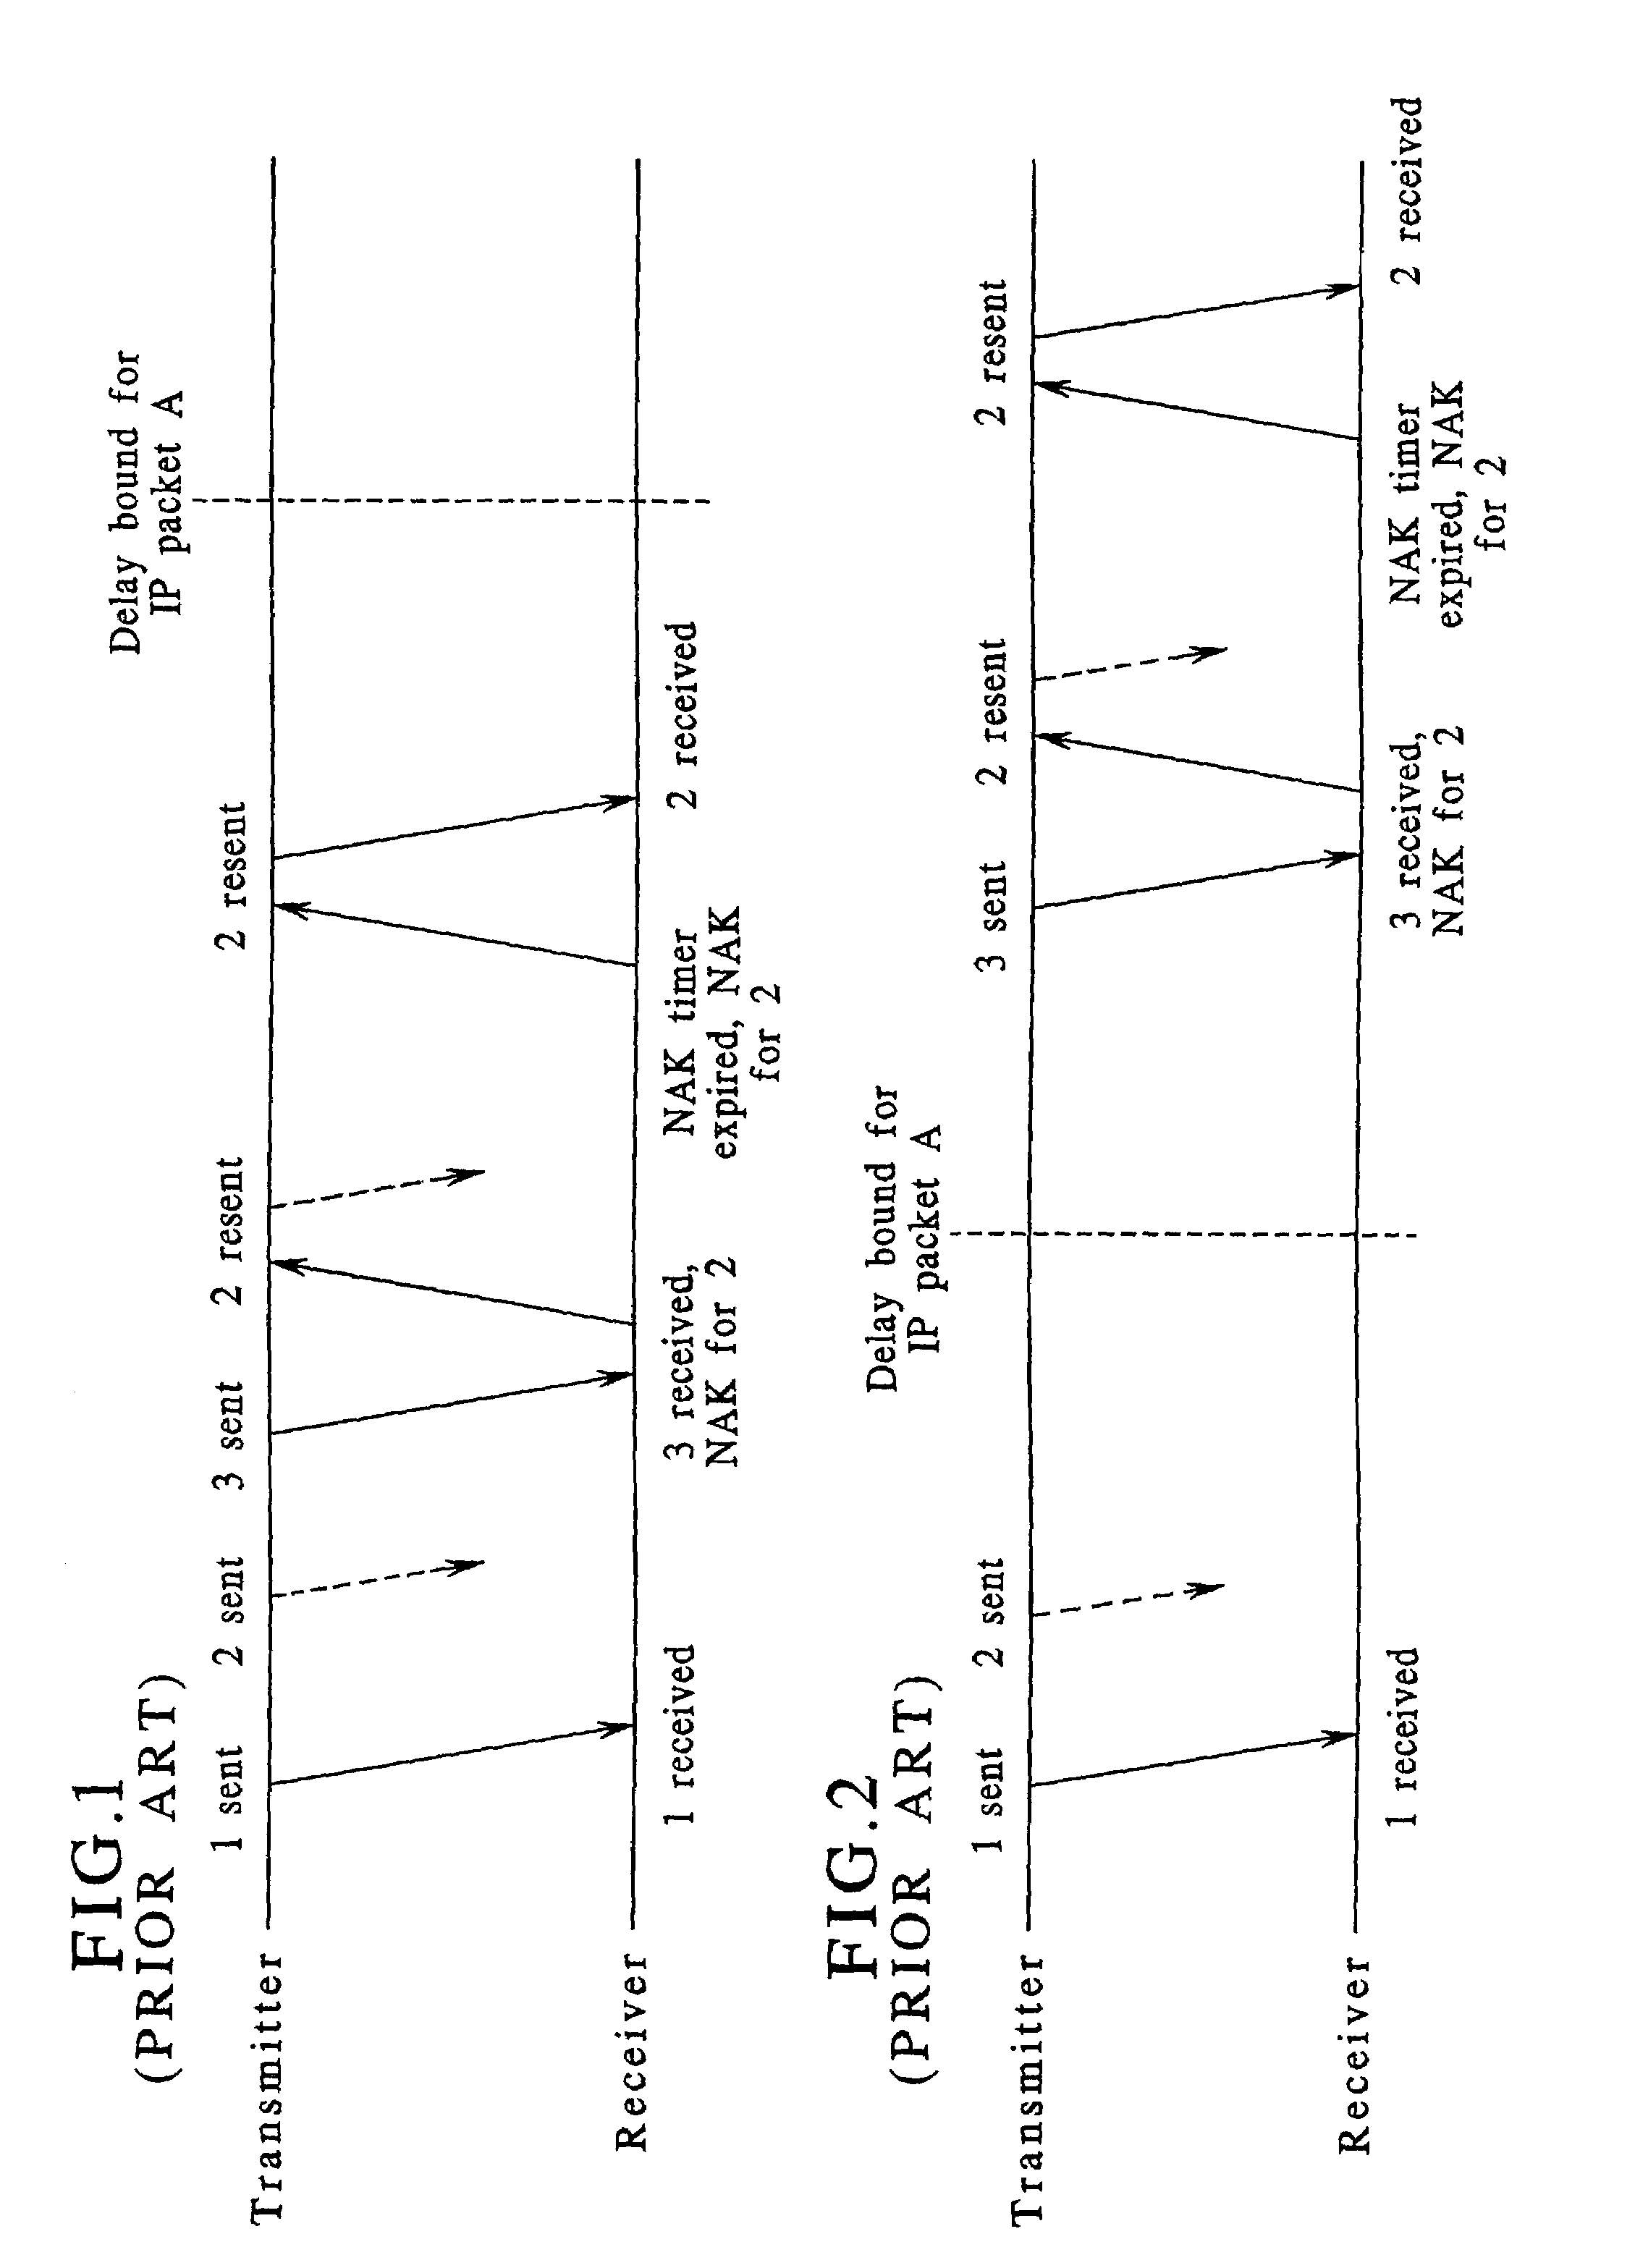 Method and apparatus for transmitting data over a network within a specified time limit